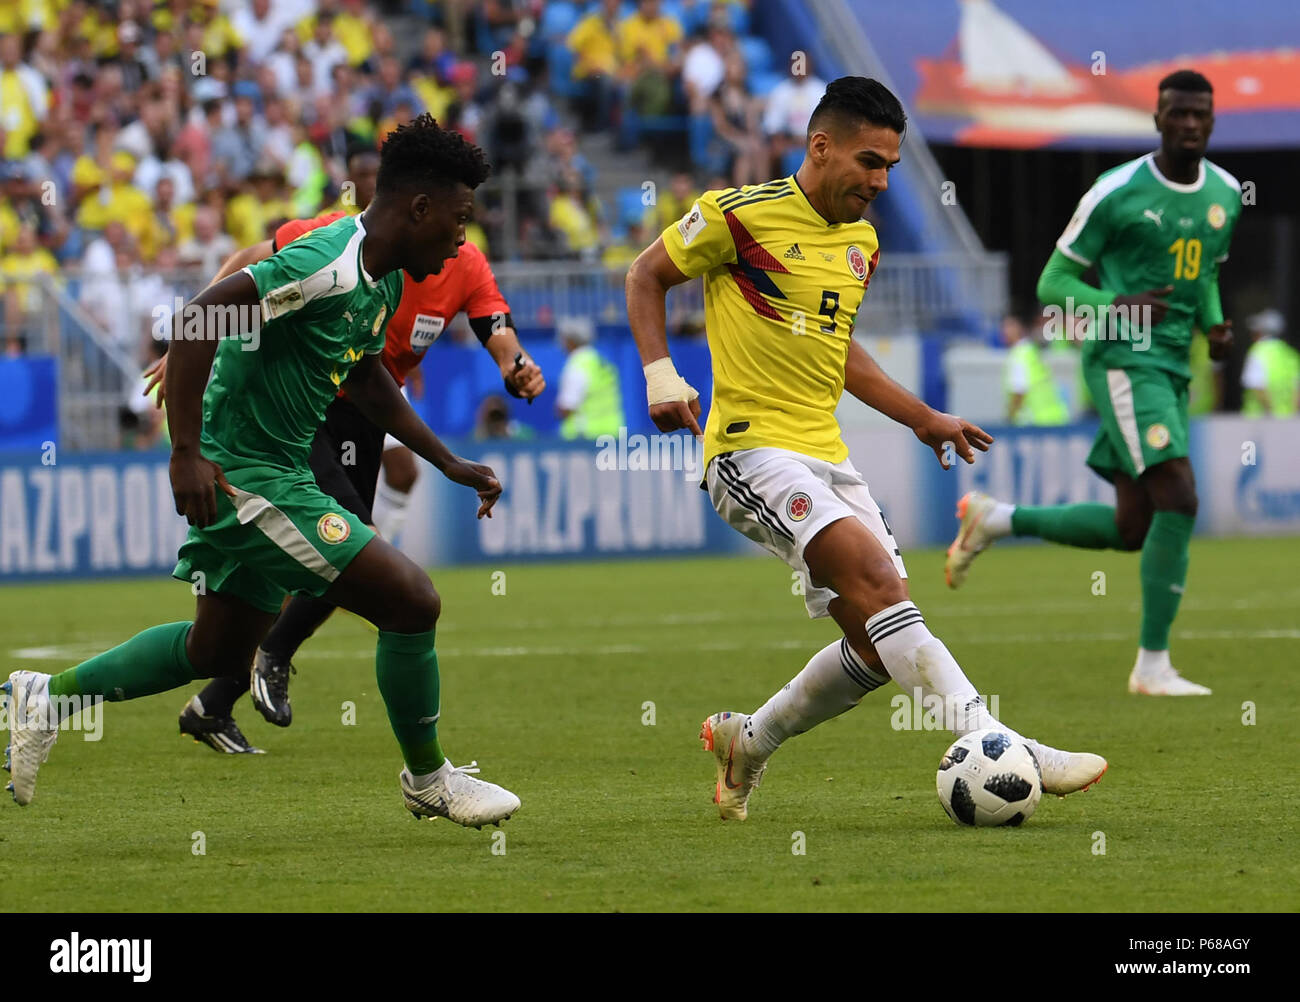 Samara, Russia. 28th June, 2018. Radamel Falcao (2nd R) of Colombia breaks through with the ball during the 2018 FIFA World Cup Group H match between Colombia and Senegal in Samara, Russia, June 28, 2018. Colombia won 1-0 and advanced to the round of 16. Credit: Chen Cheng/Xinhua/Alamy Live News Stock Photo